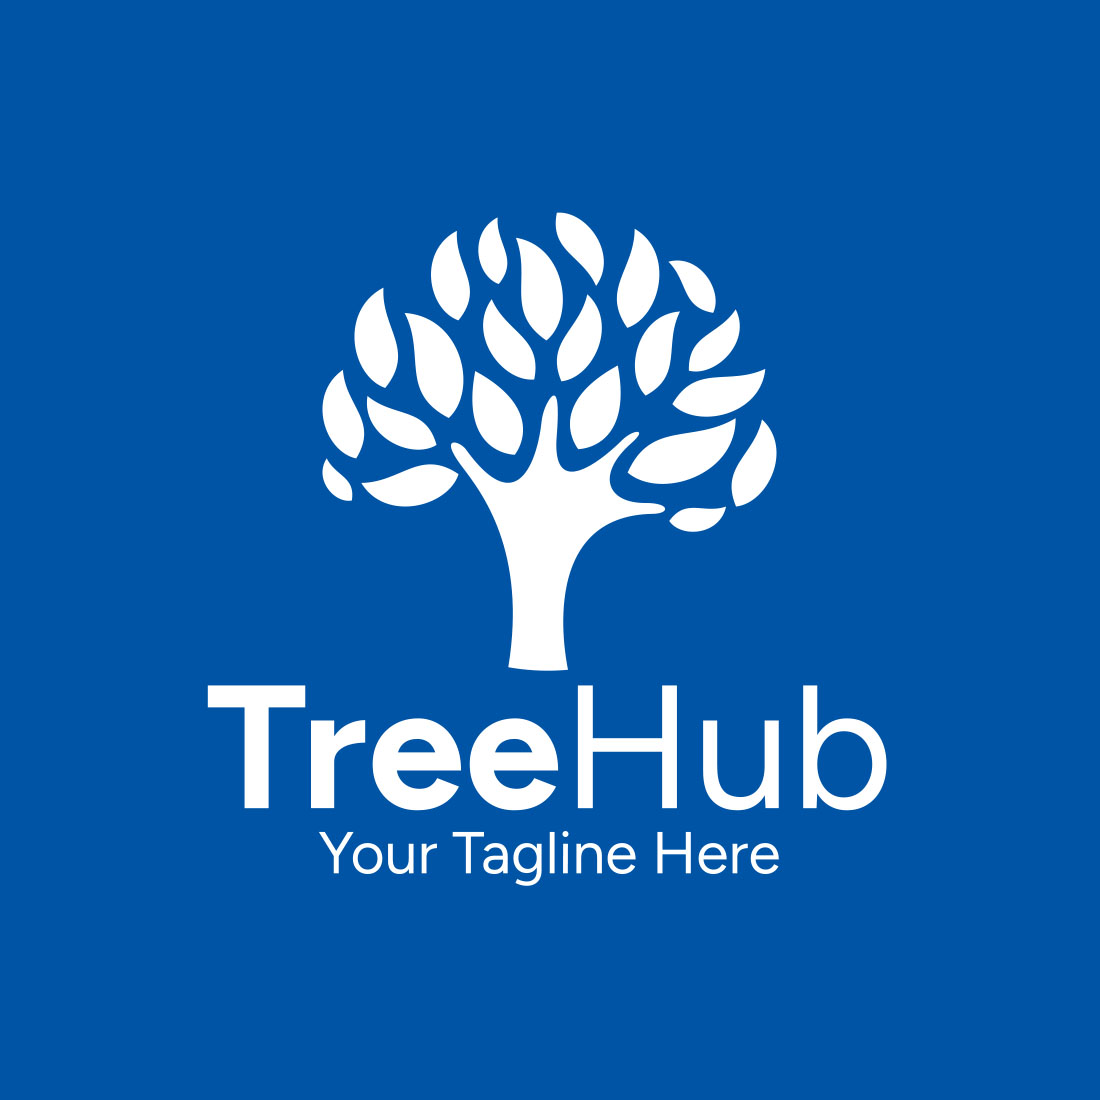 Tree Hub Logo Template and blue background.